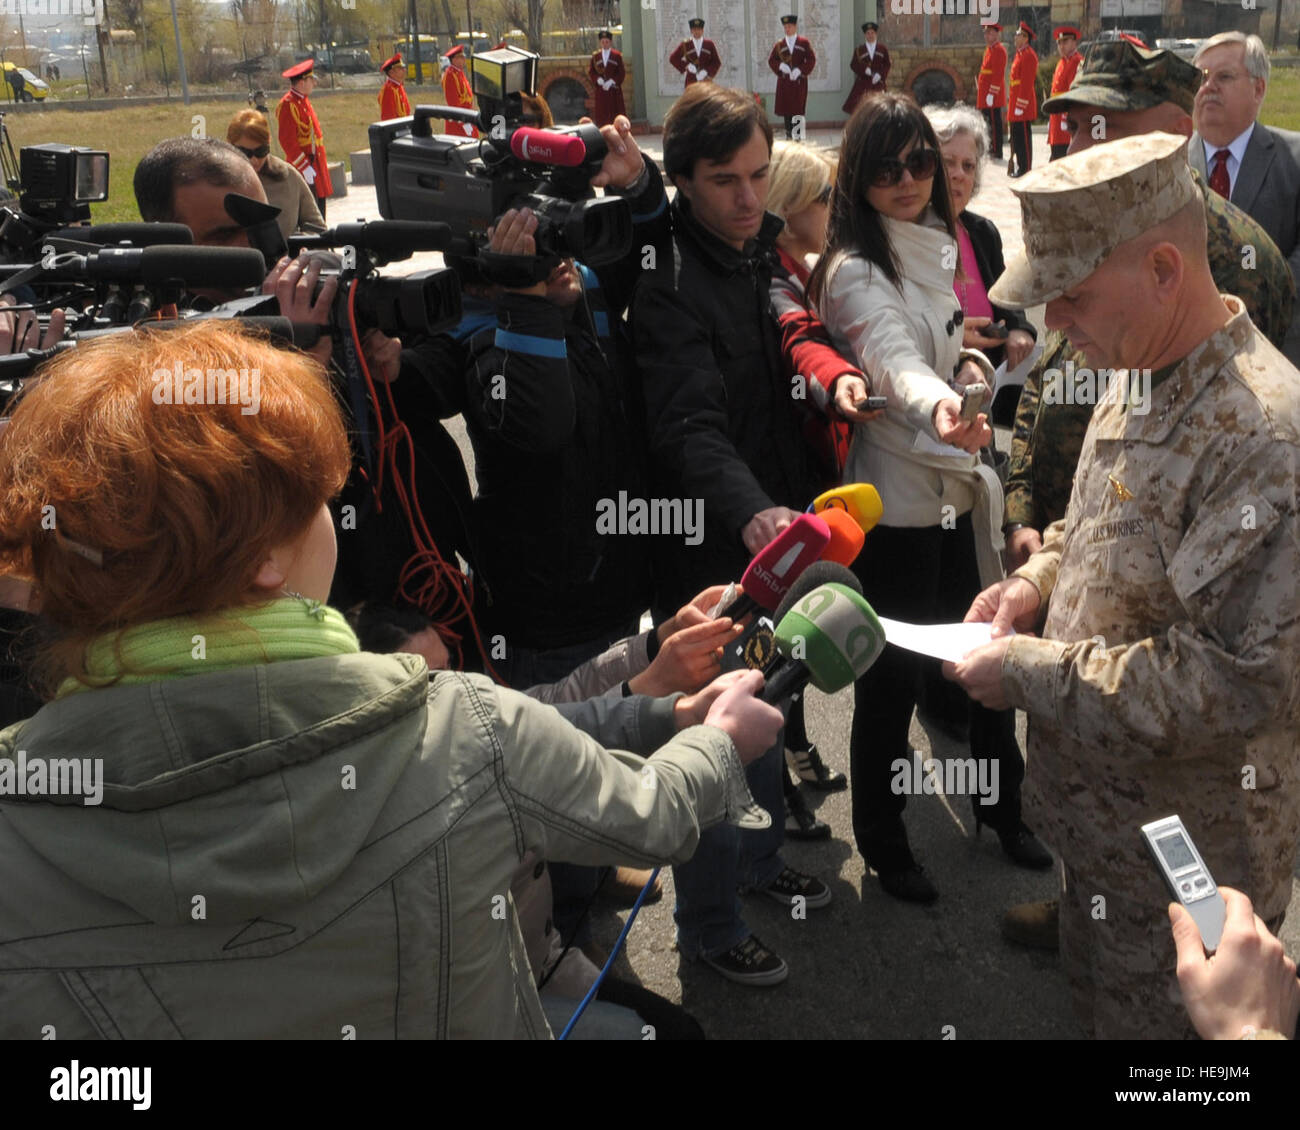 Vice Chairman of the Joint Chiefs of Staff U.S. Marine Gen. James E. Cartwright reads a statement during a press interview in Gori, Georgia, March 30, 2009. Cartwright visited the country to meet with senior Georgian civilian and military officials.  Air Force Master Sgt. Adam M. Stump. (Released) Stock Photo